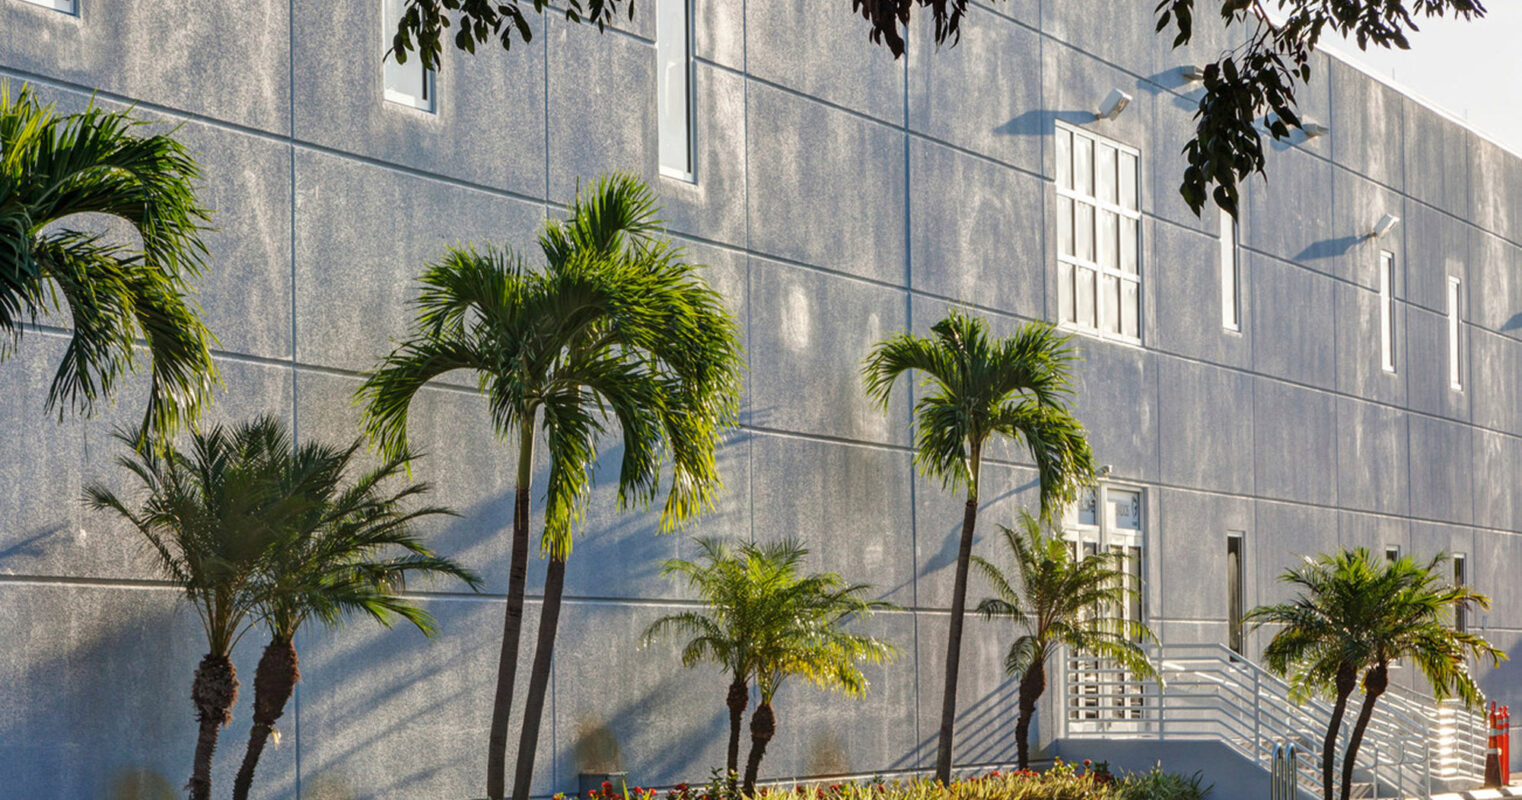 Sunlit modern building exterior with articulated gray facade and rhythmic white-framed windows, flanked by lush palm trees and vibrant tropical landscaping, showcasing architectural use of natural light and vegetation integration.